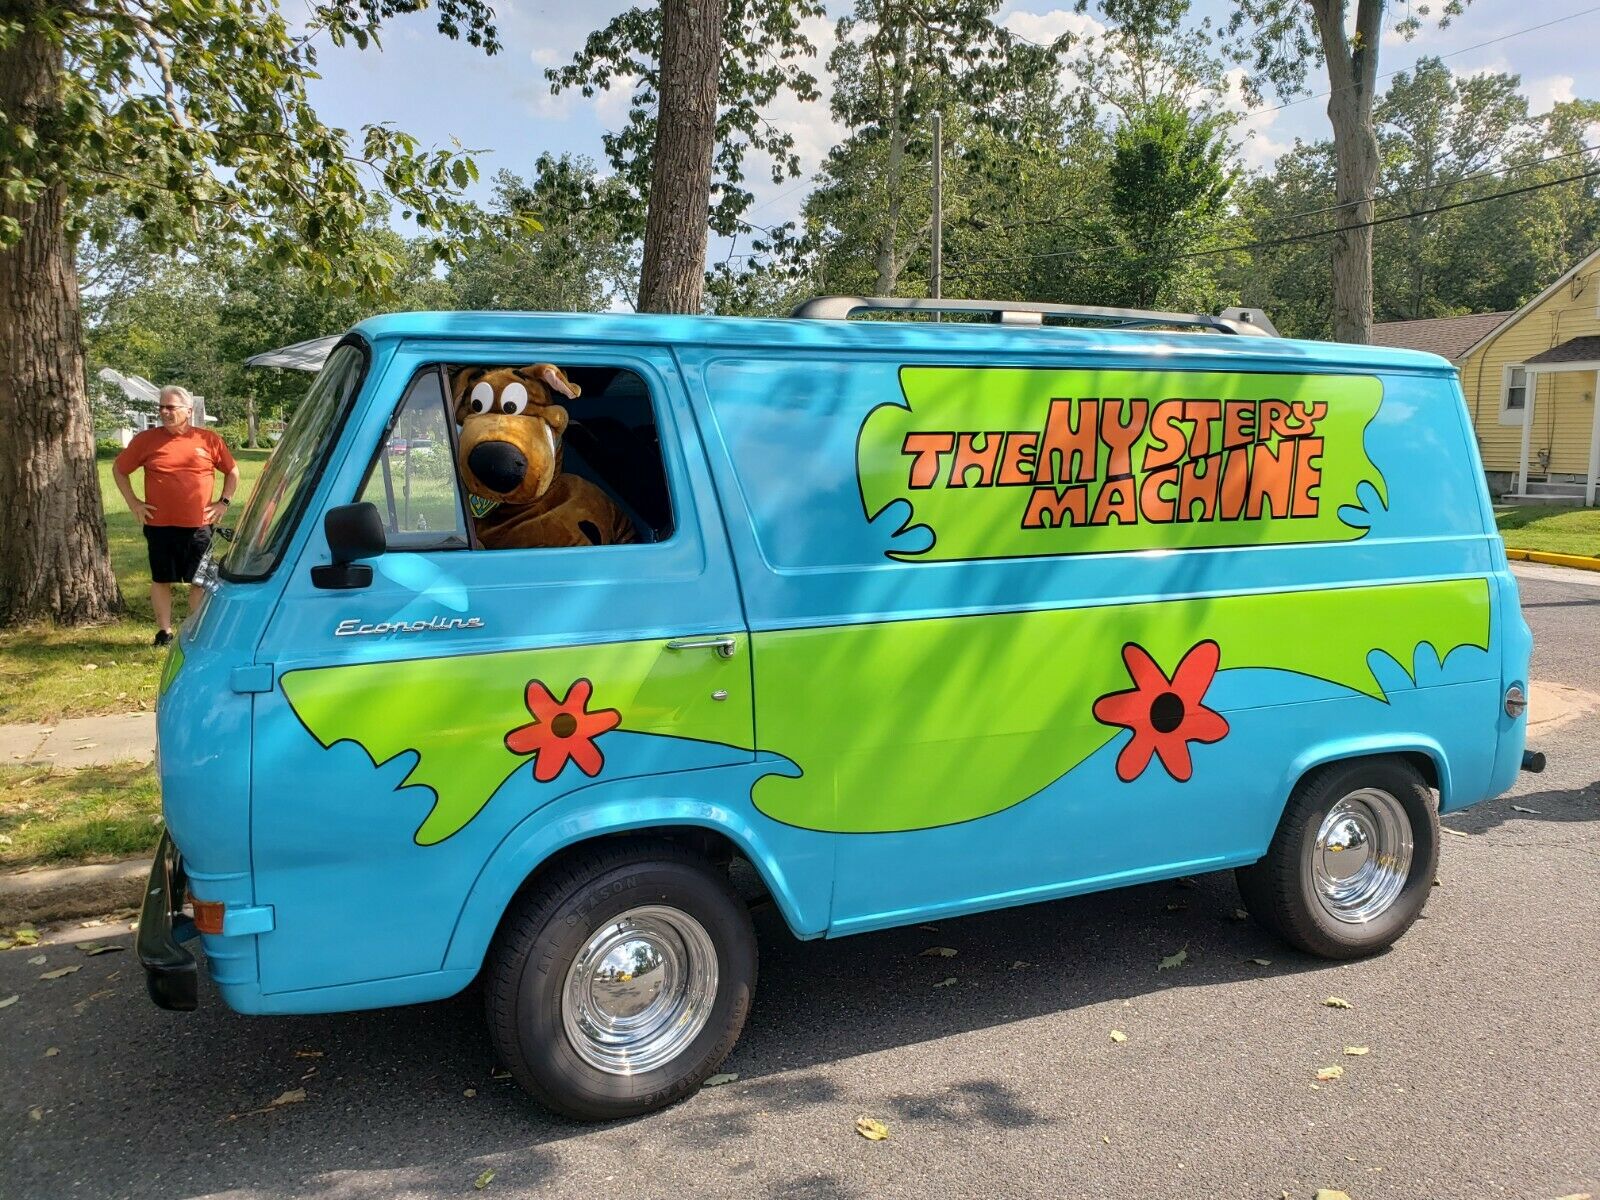 1967 Ford Econoline Mystery Machine for sale: photos, technical ...